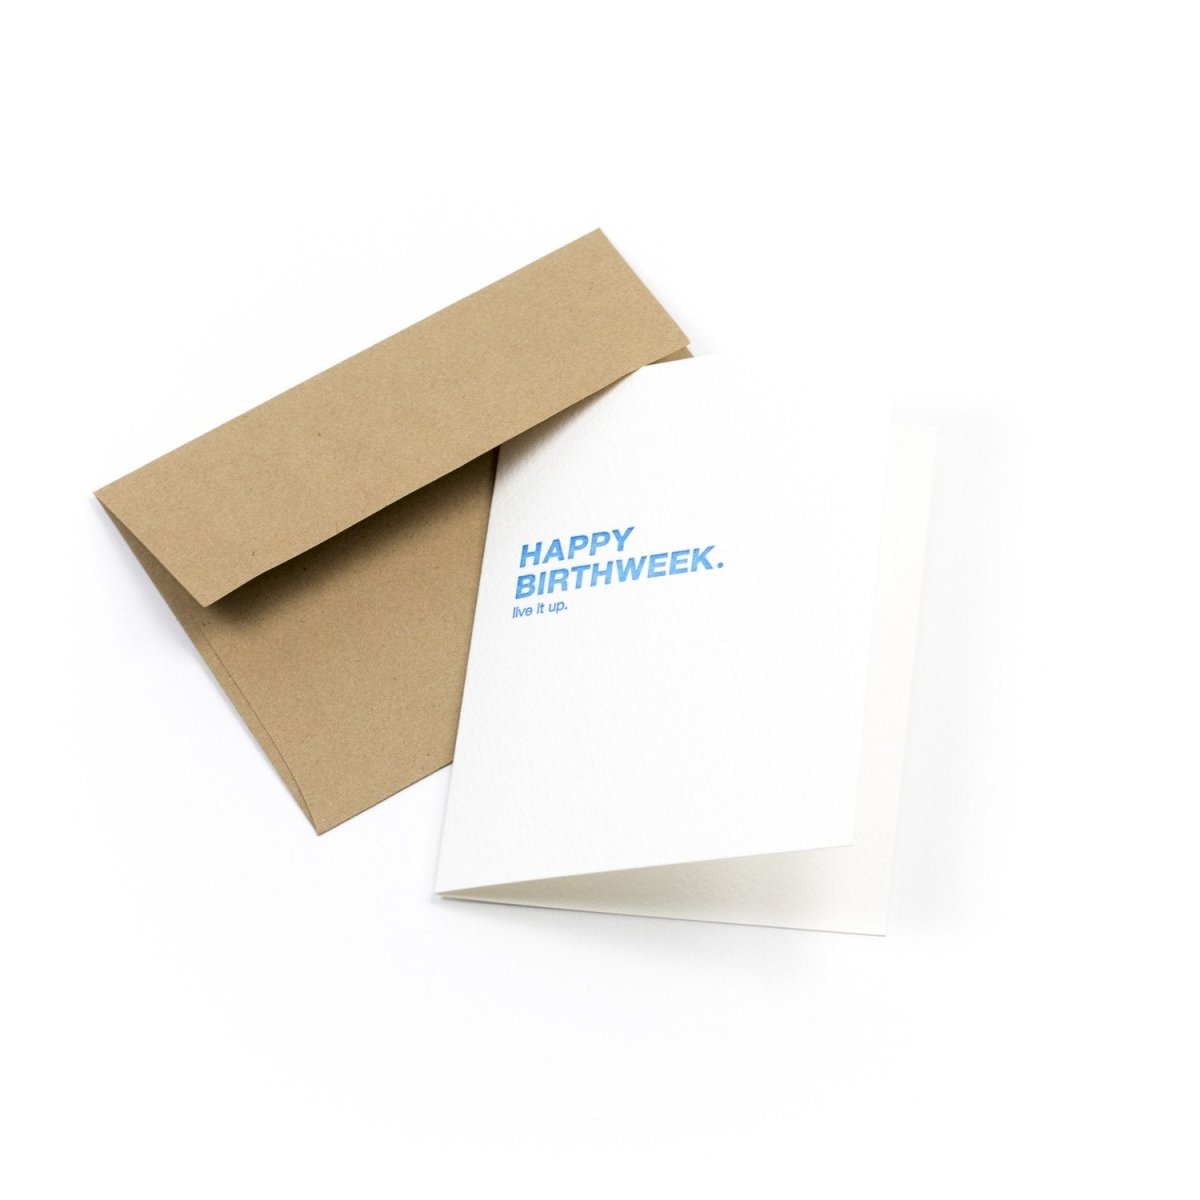 White card that reads: "HAPPY BIRTHWEEK. LIVE IT UP." Written in blue text. Comes with a Kraft envelope. Designed by Sapling Press and printed in Pittsburgh, PA.